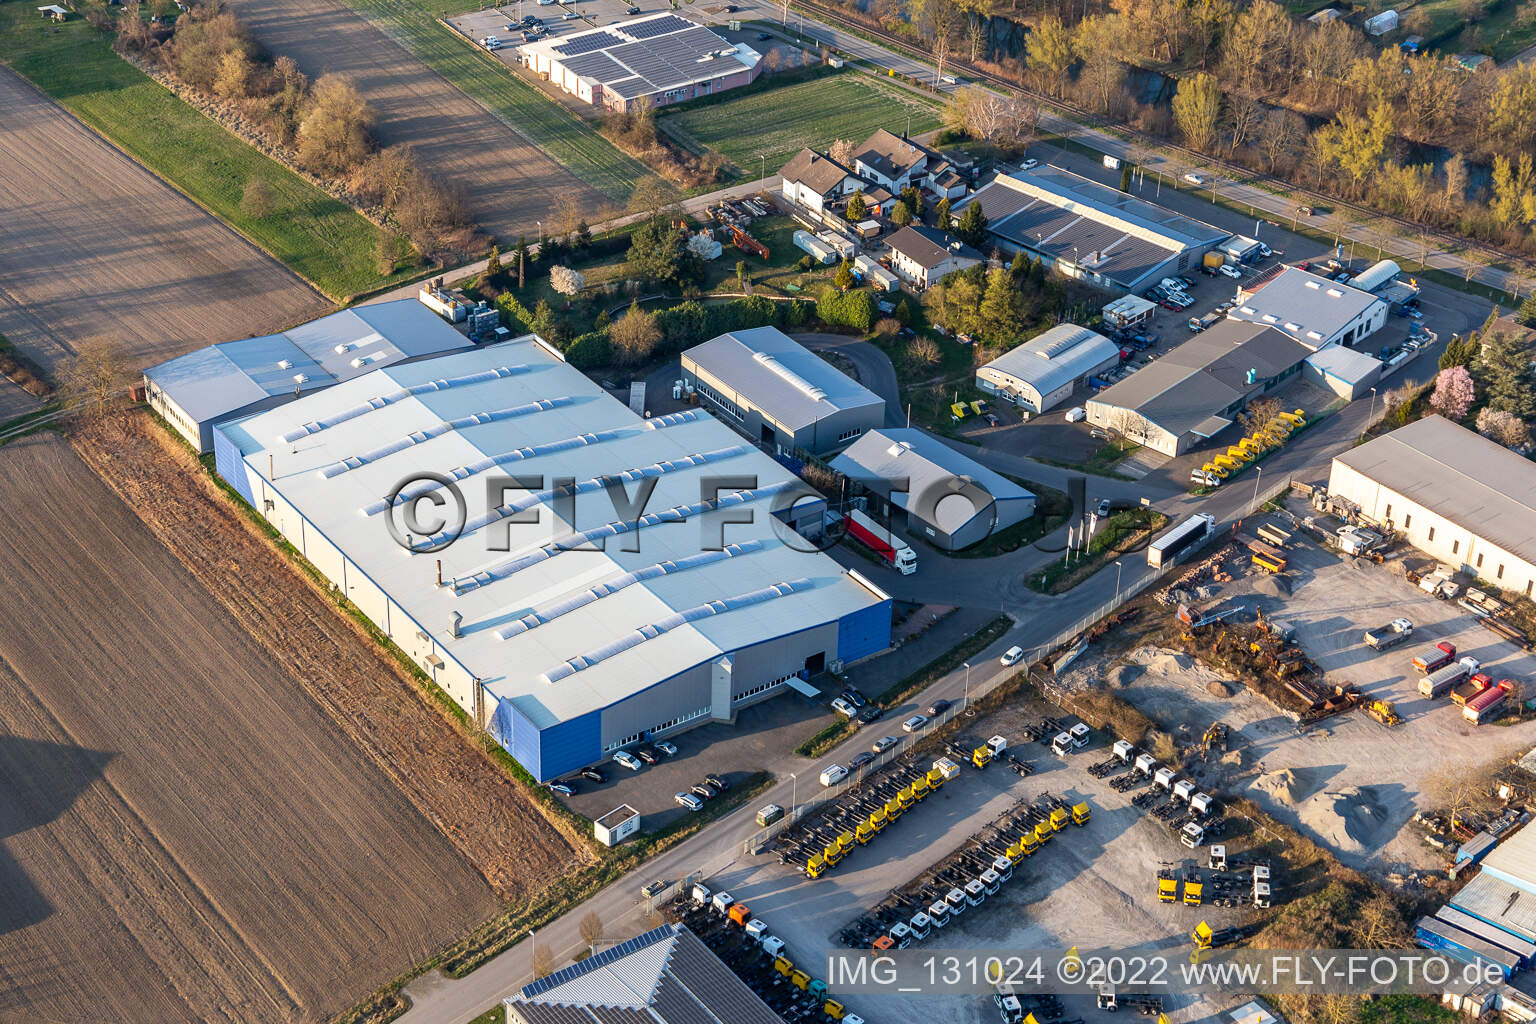 OFTEC Surface Technology GmbH & Co. KG in Hagenbach in the state Rhineland-Palatinate, Germany